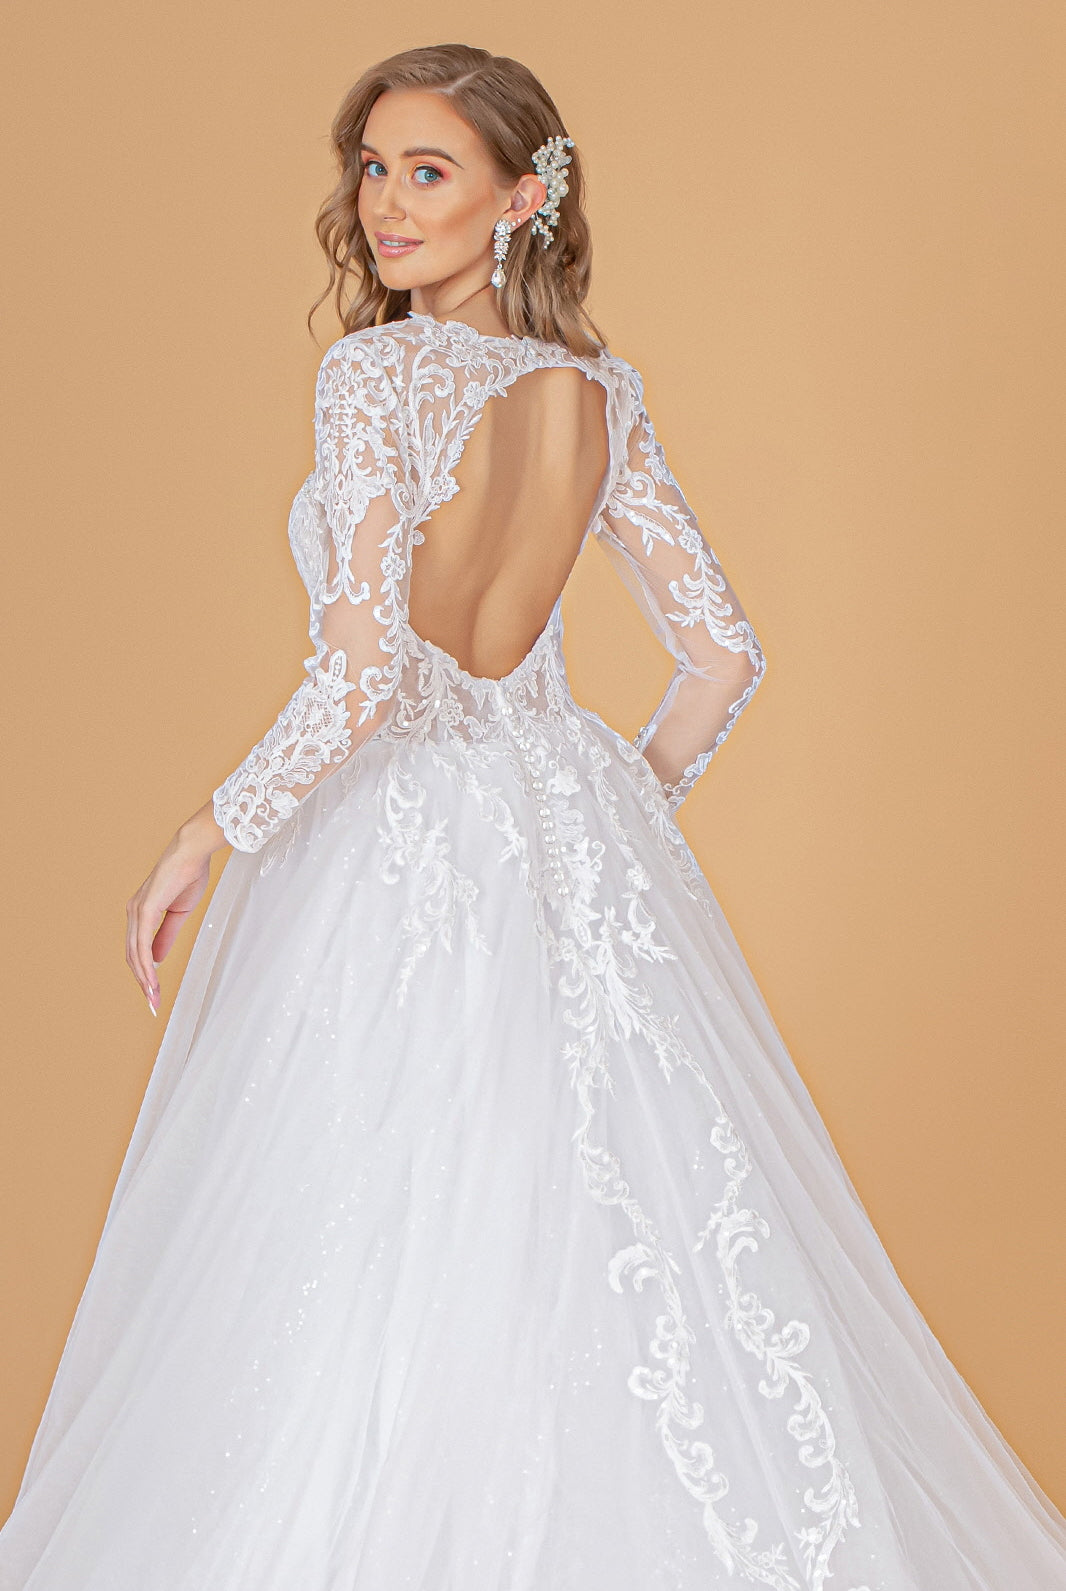 Illusion V-Neck Embroidered Mesh Wedding Gown Sequin Lining GLGL1804-WEDDING GOWNS-smcfashion.com